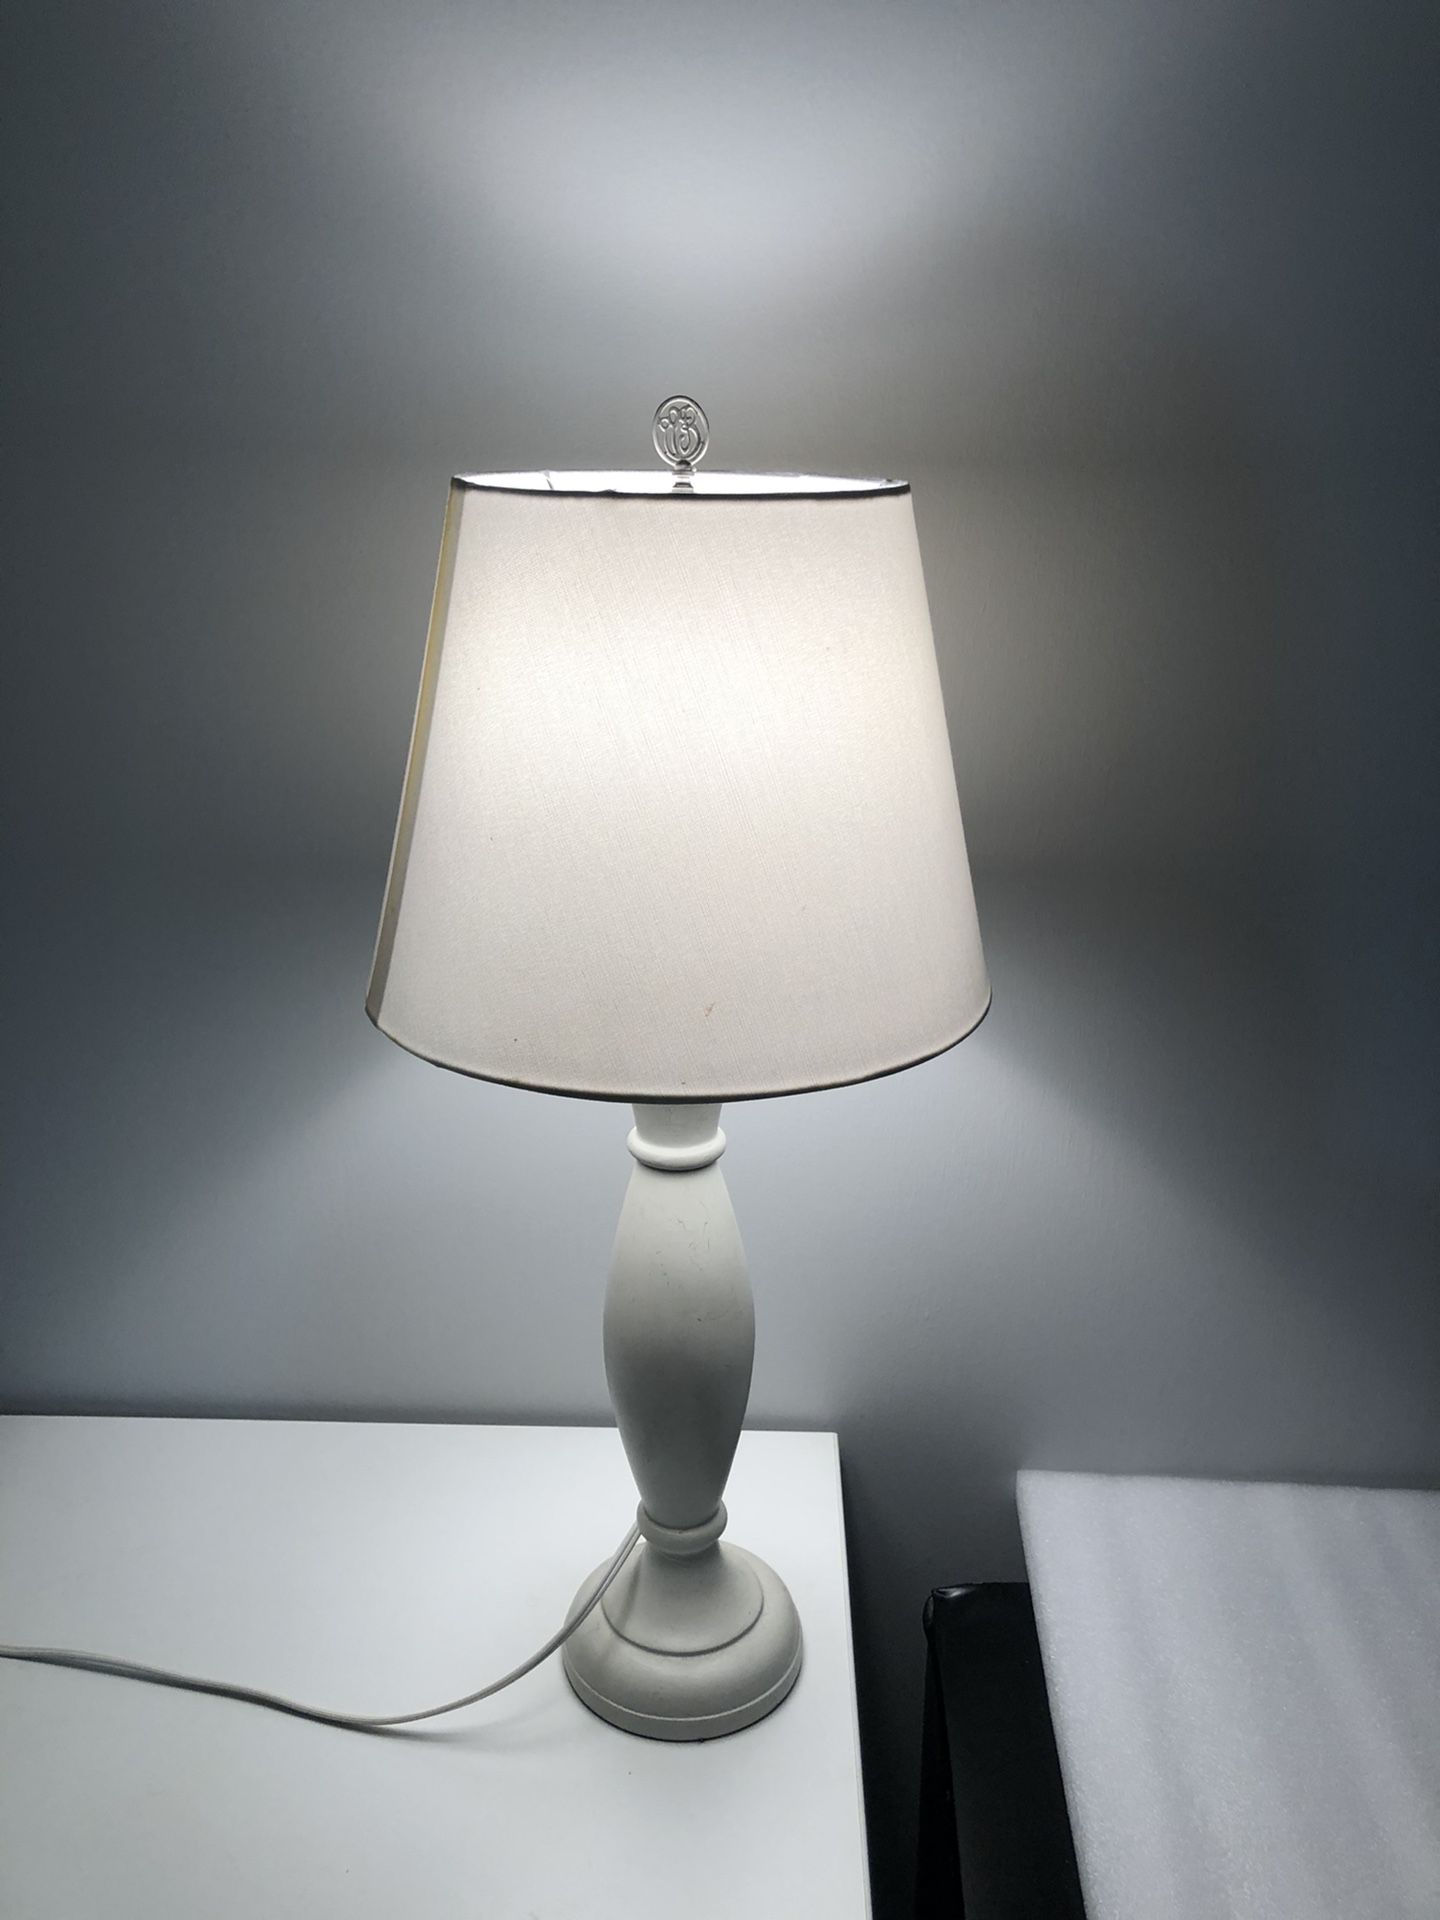 Simple white table lamp